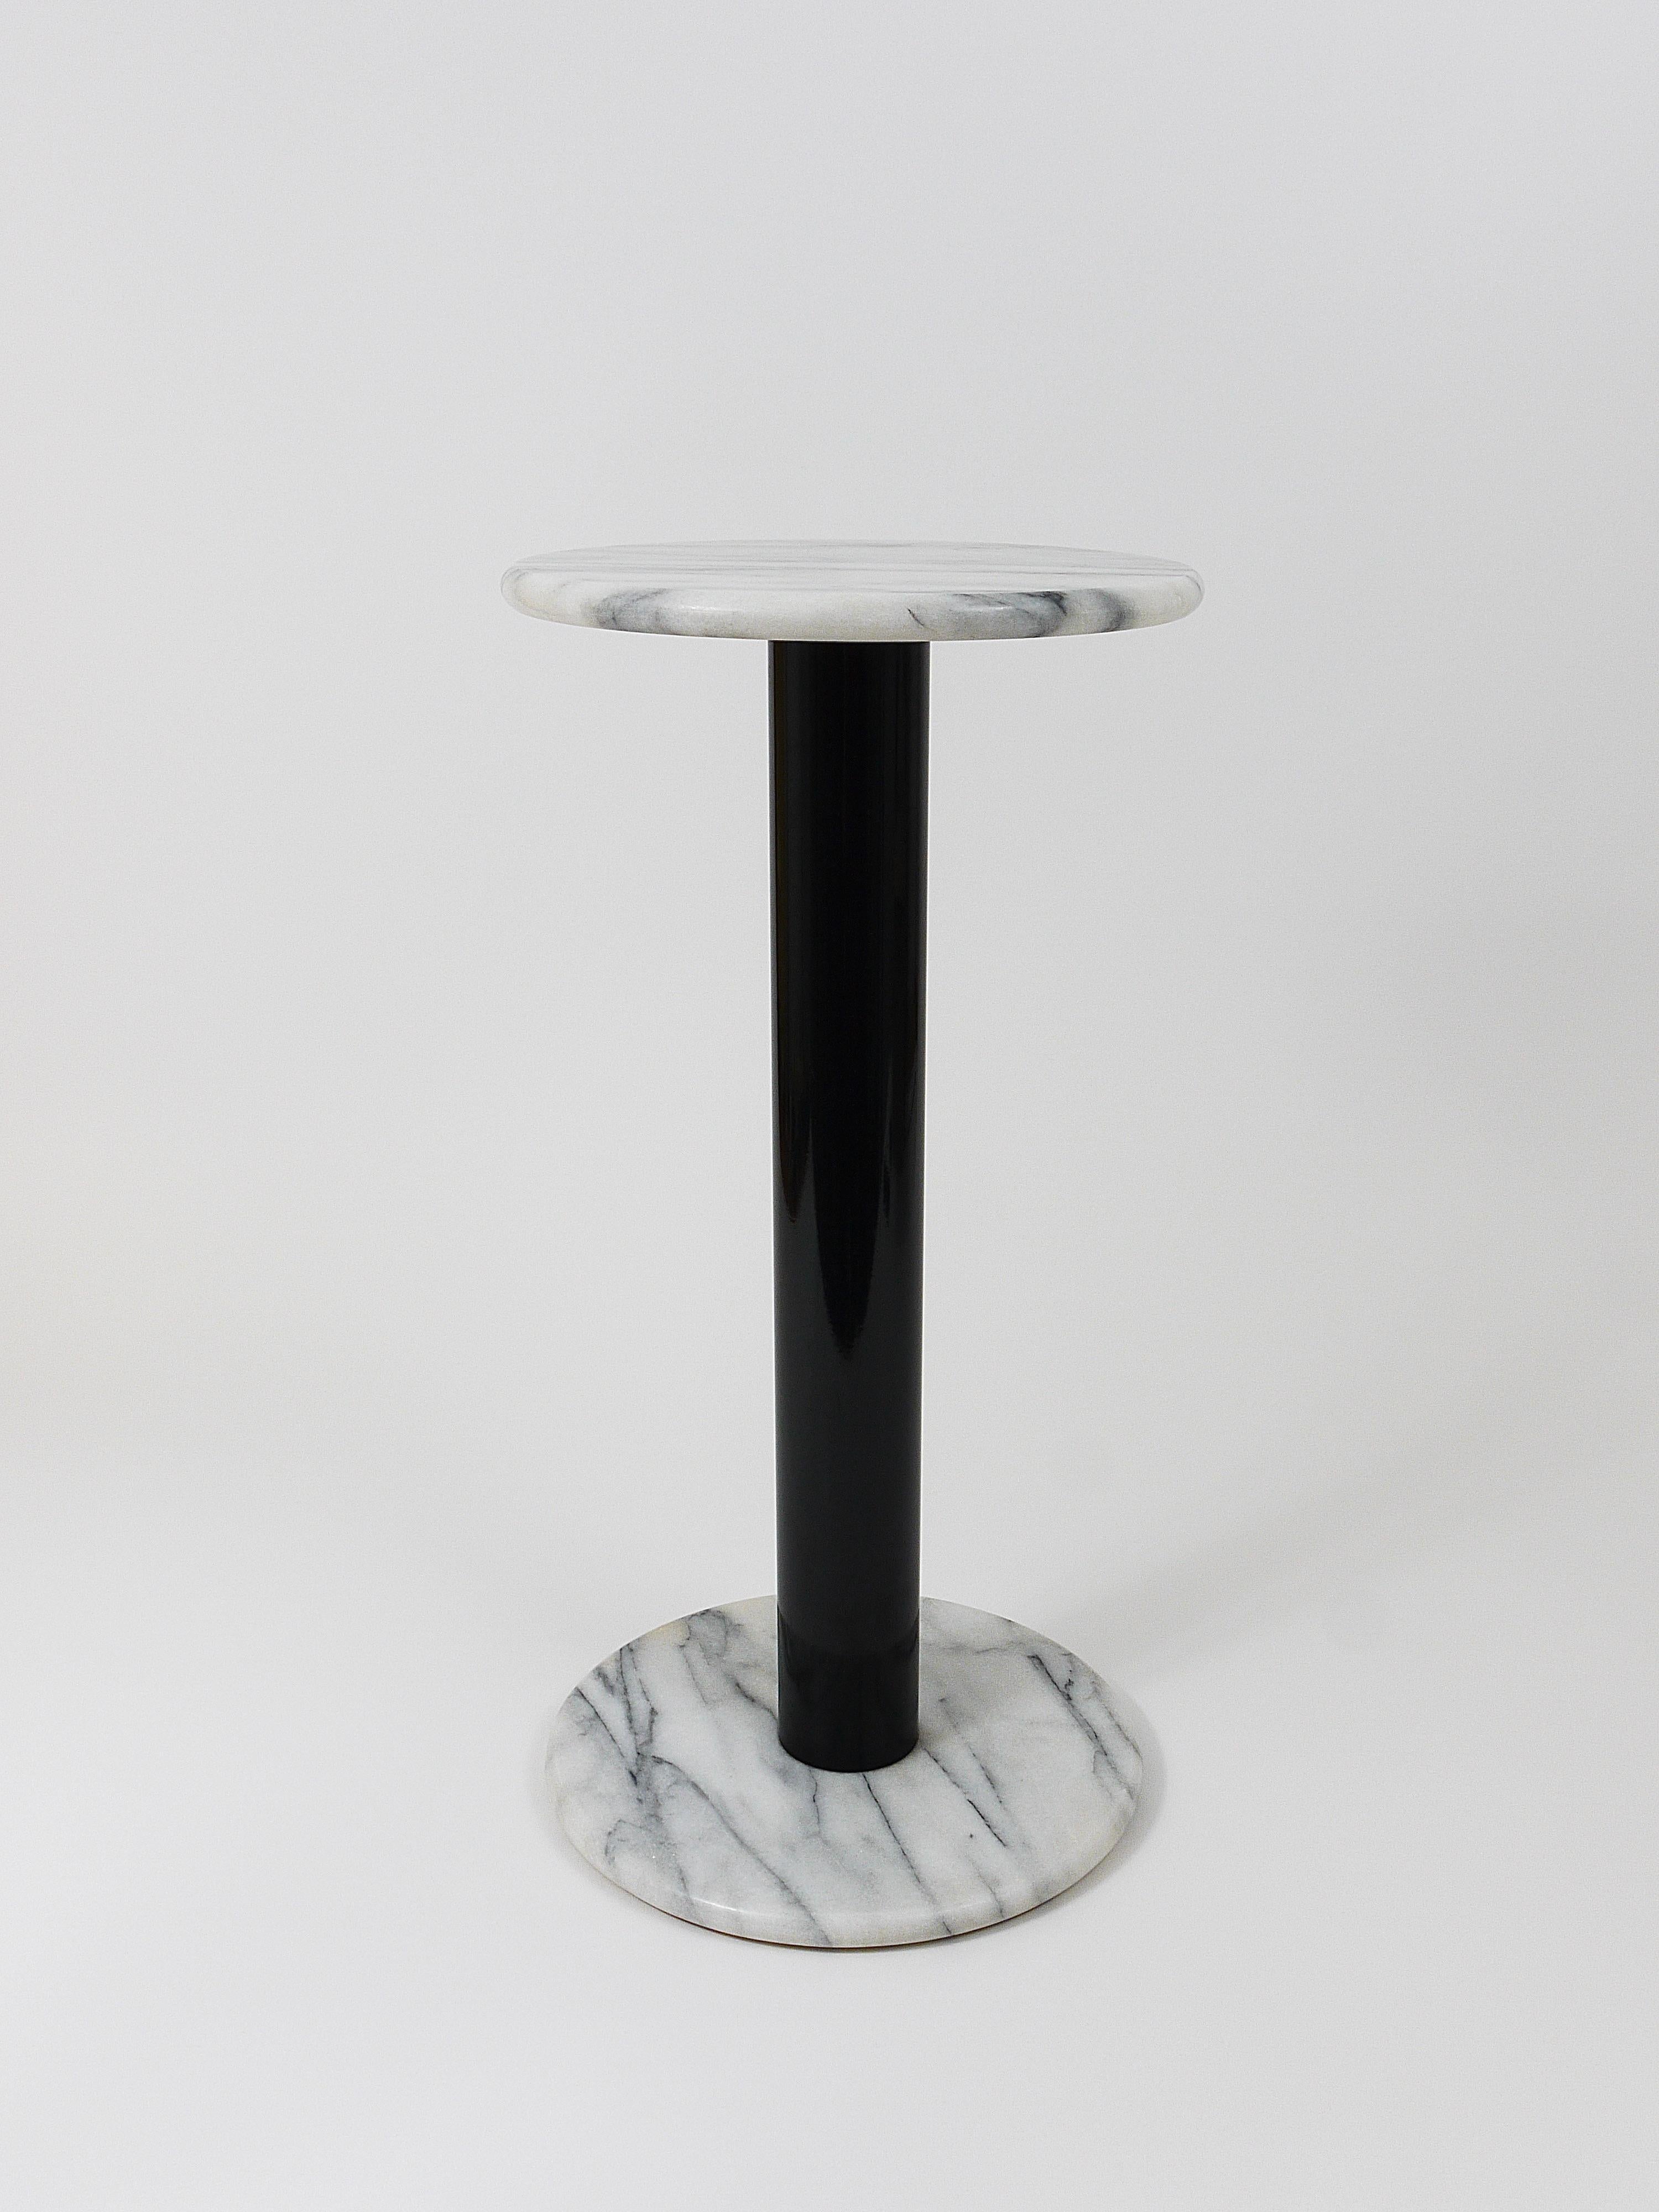 Postmodern White Carrara Marble Flower Stand Pedestal Table, Italy, 1980s For Sale 3